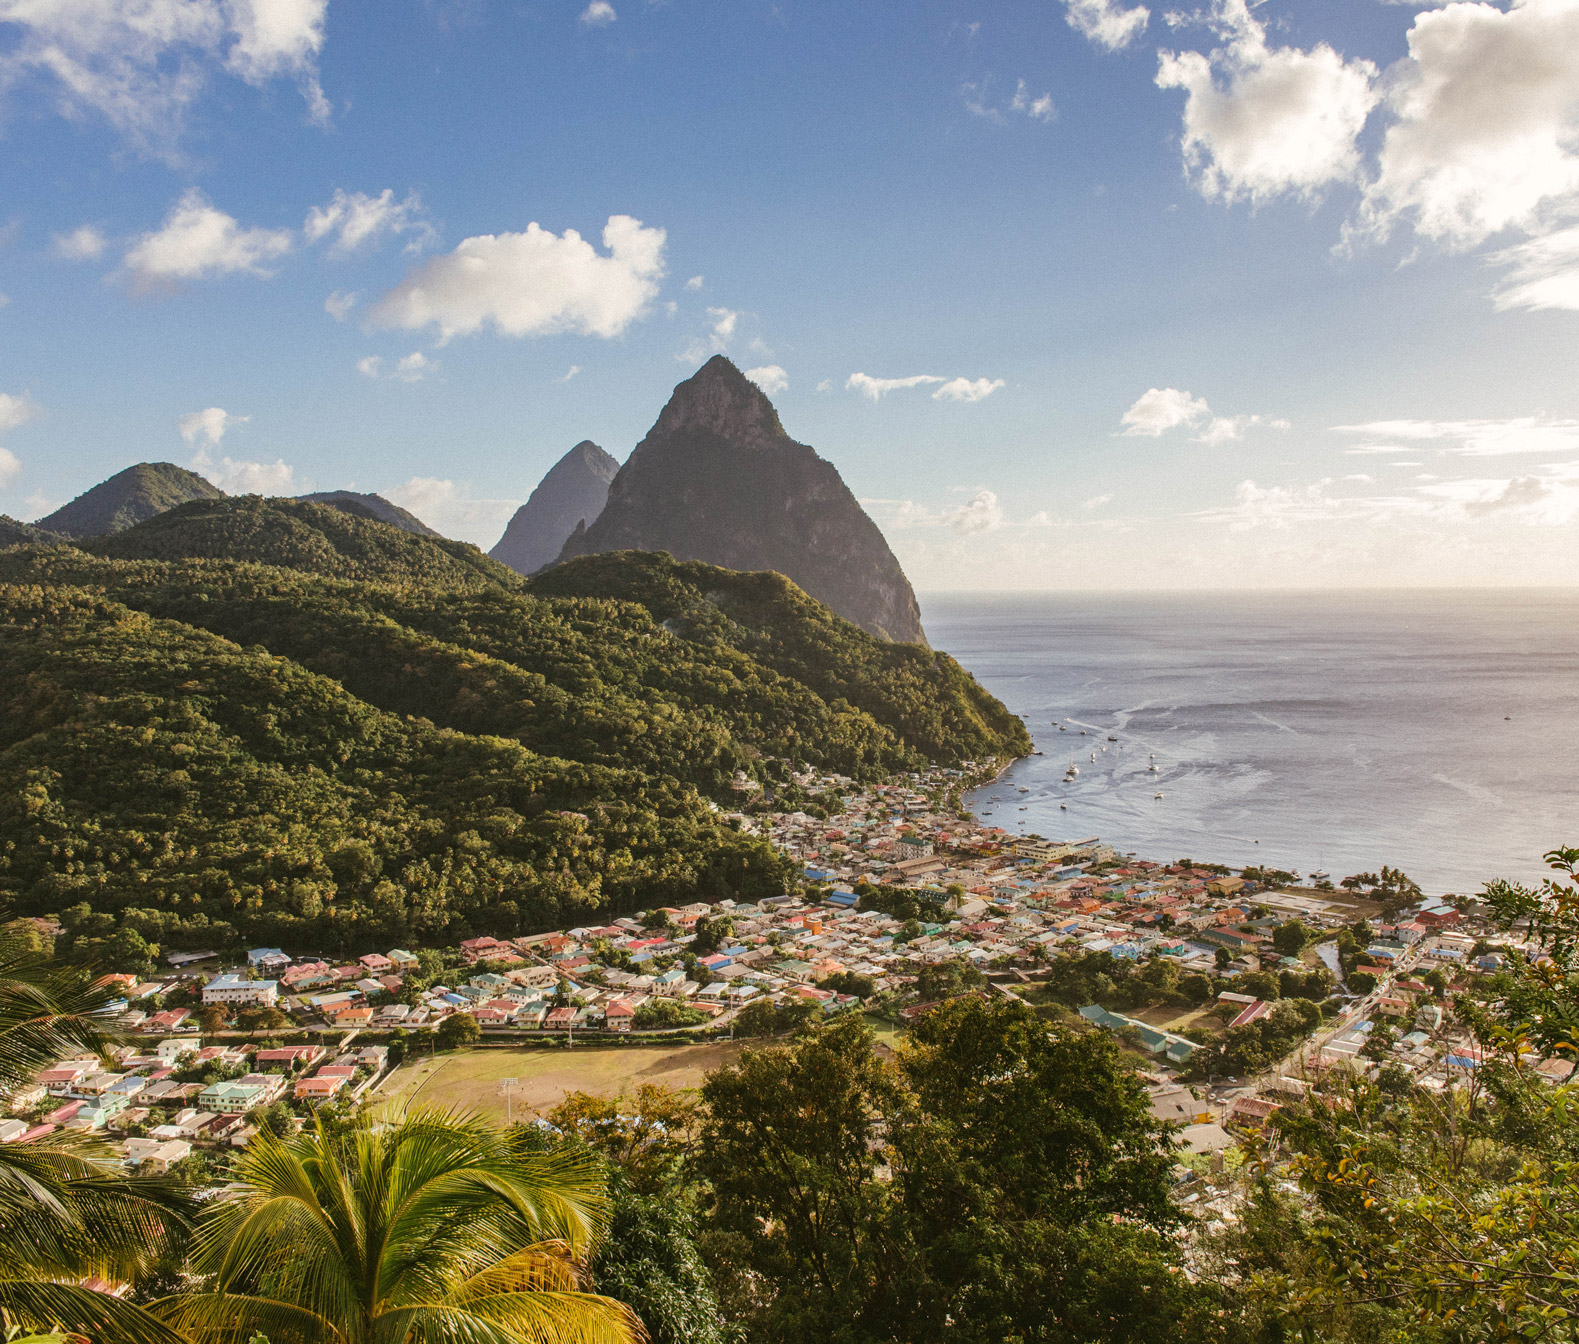 view overlooking a town in st lucia by the ocean